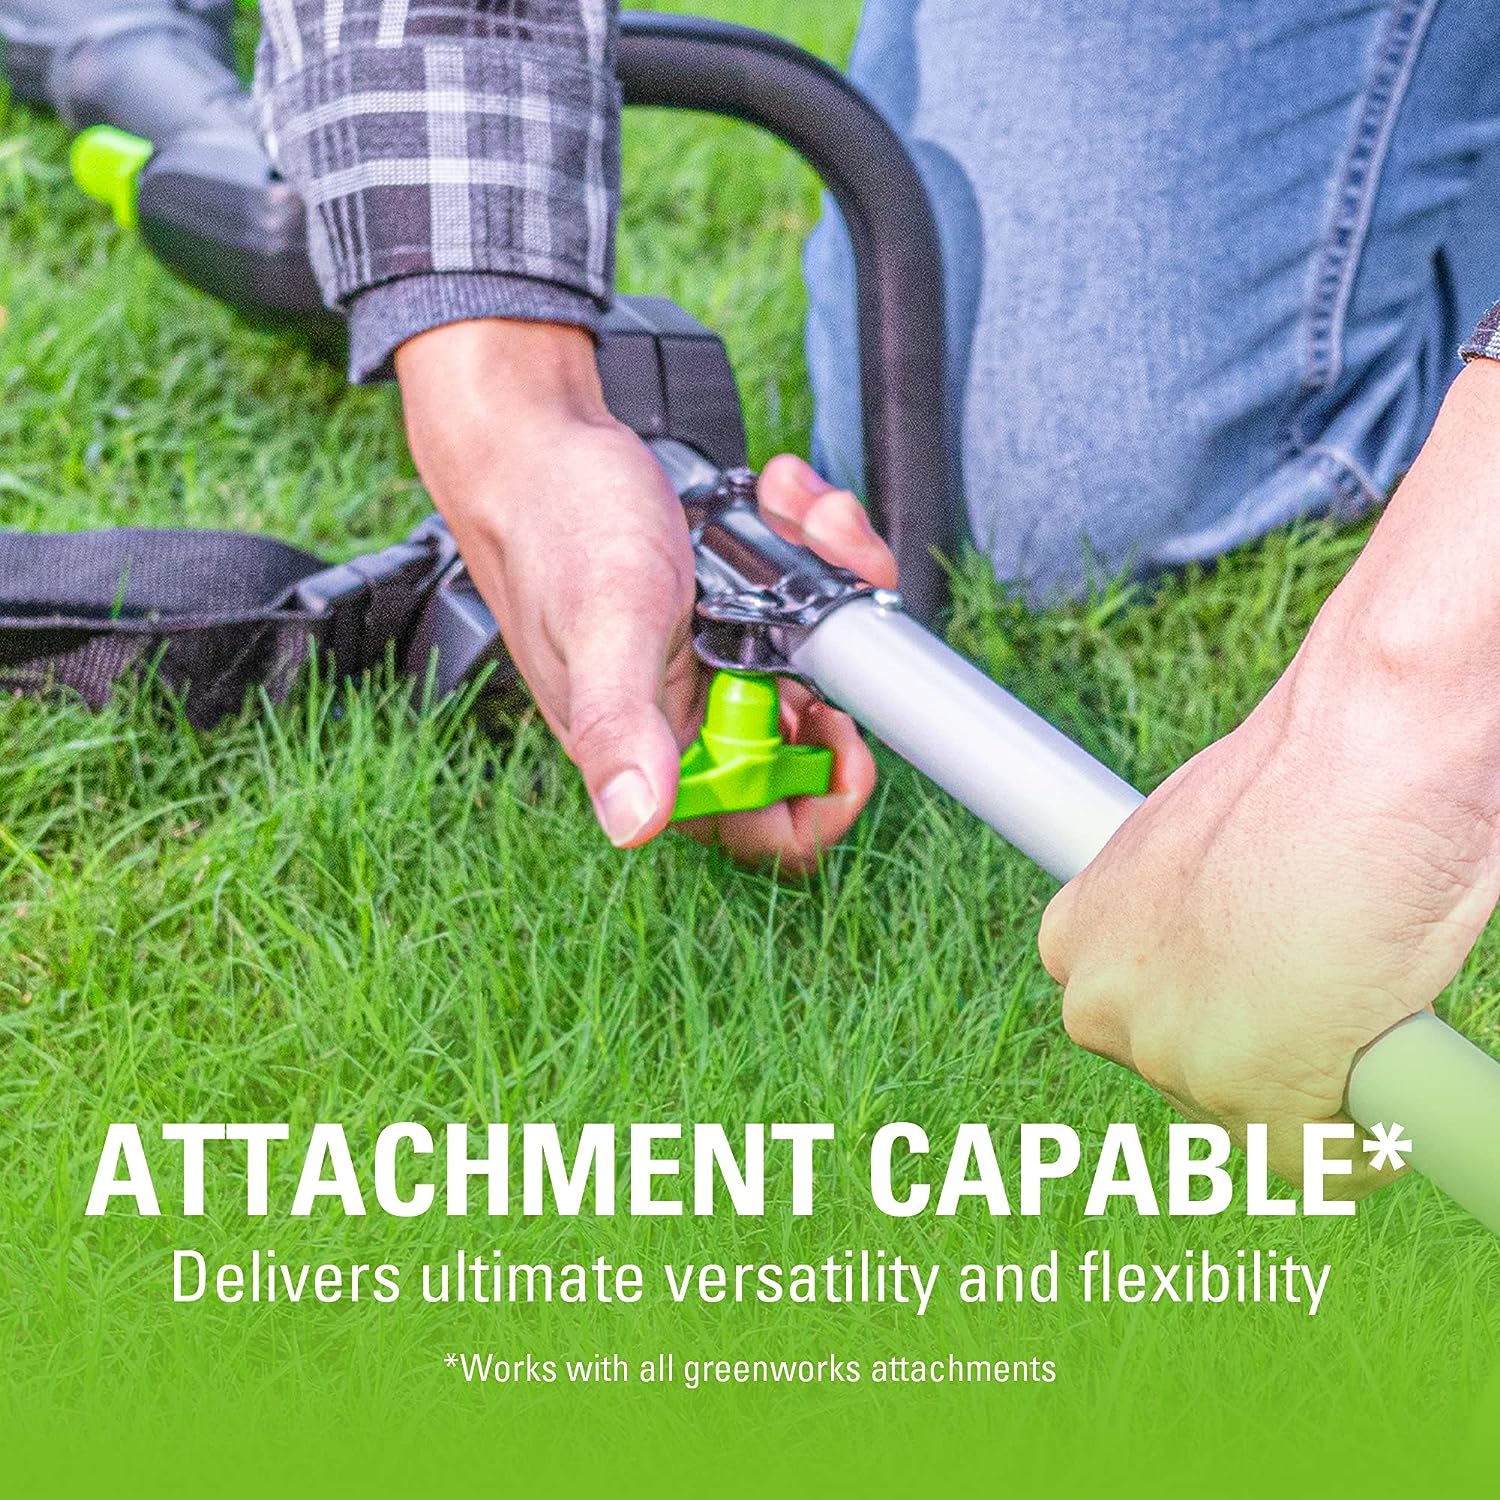 40V 16" Attachment Capable String Trimmer w/ 4Ah Battery & Charger